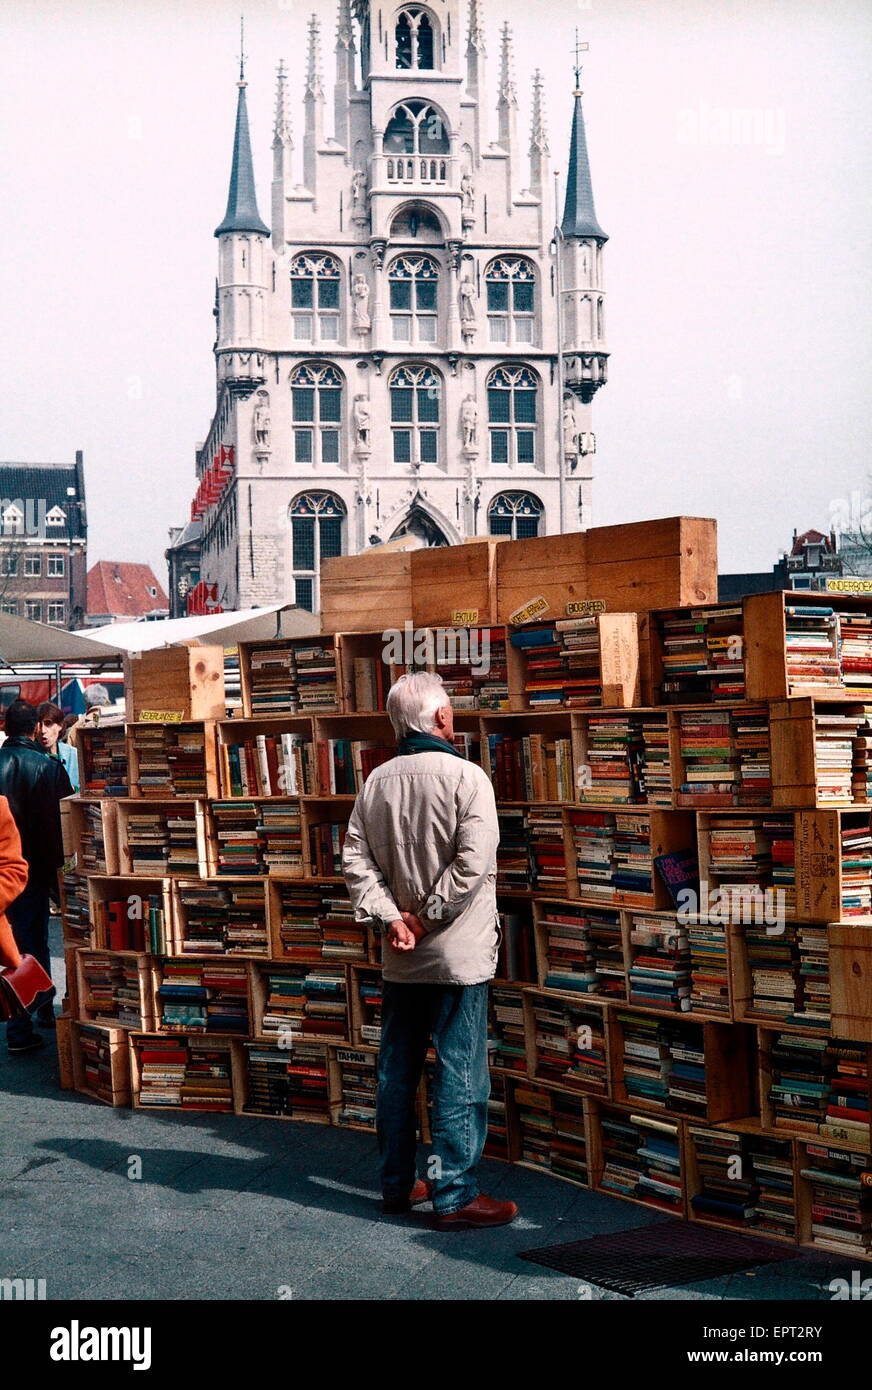 AJAXNETPHOTO. GOUDA, HOLLAND - BOOK WORM - SECOND-HAND BOOKSTALL IN THE MARKET SQUARE WITH SPIRES OF THE GOTHIC 15TH CENTURY TOWN HALL IN BACKGROUND. PHOTO:JONATHAN EASTLAND/AJAX REF:3526 11 1A Stock Photo